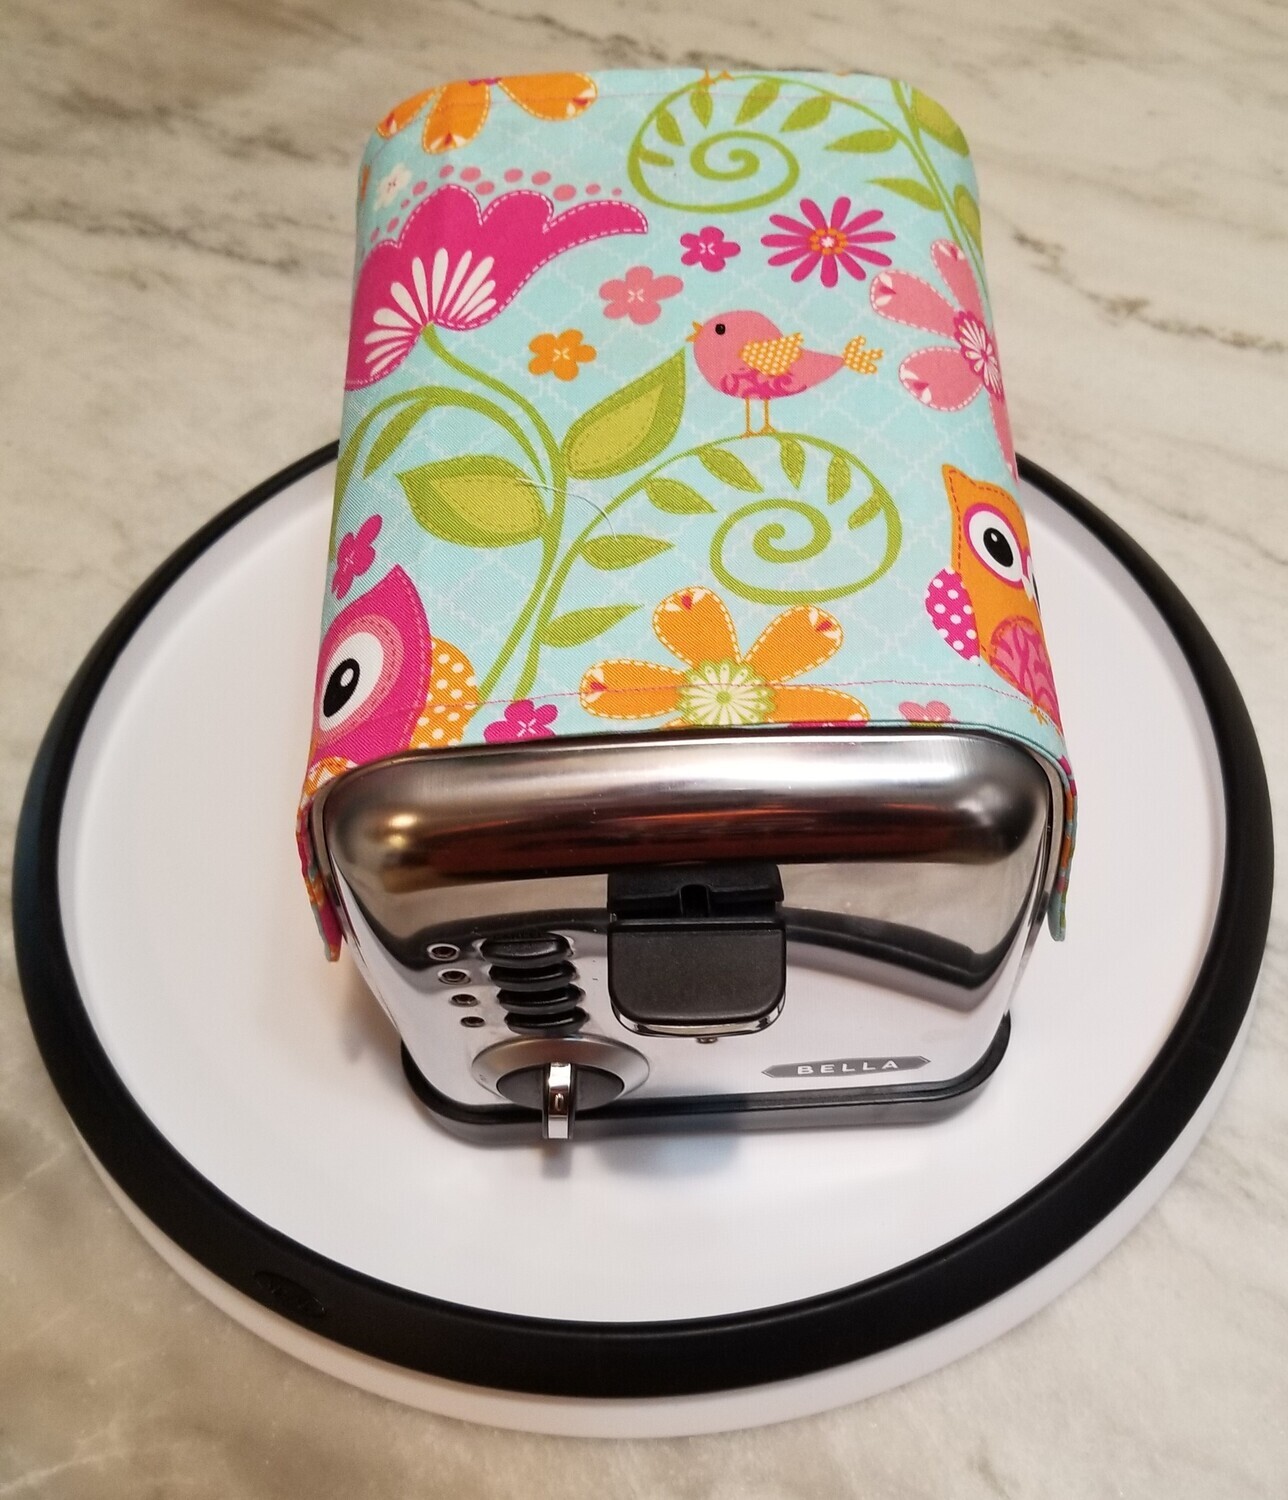 Toaster Huggee 2 Slice Toaster Cover- Pink Owl Print |It's Magnetic